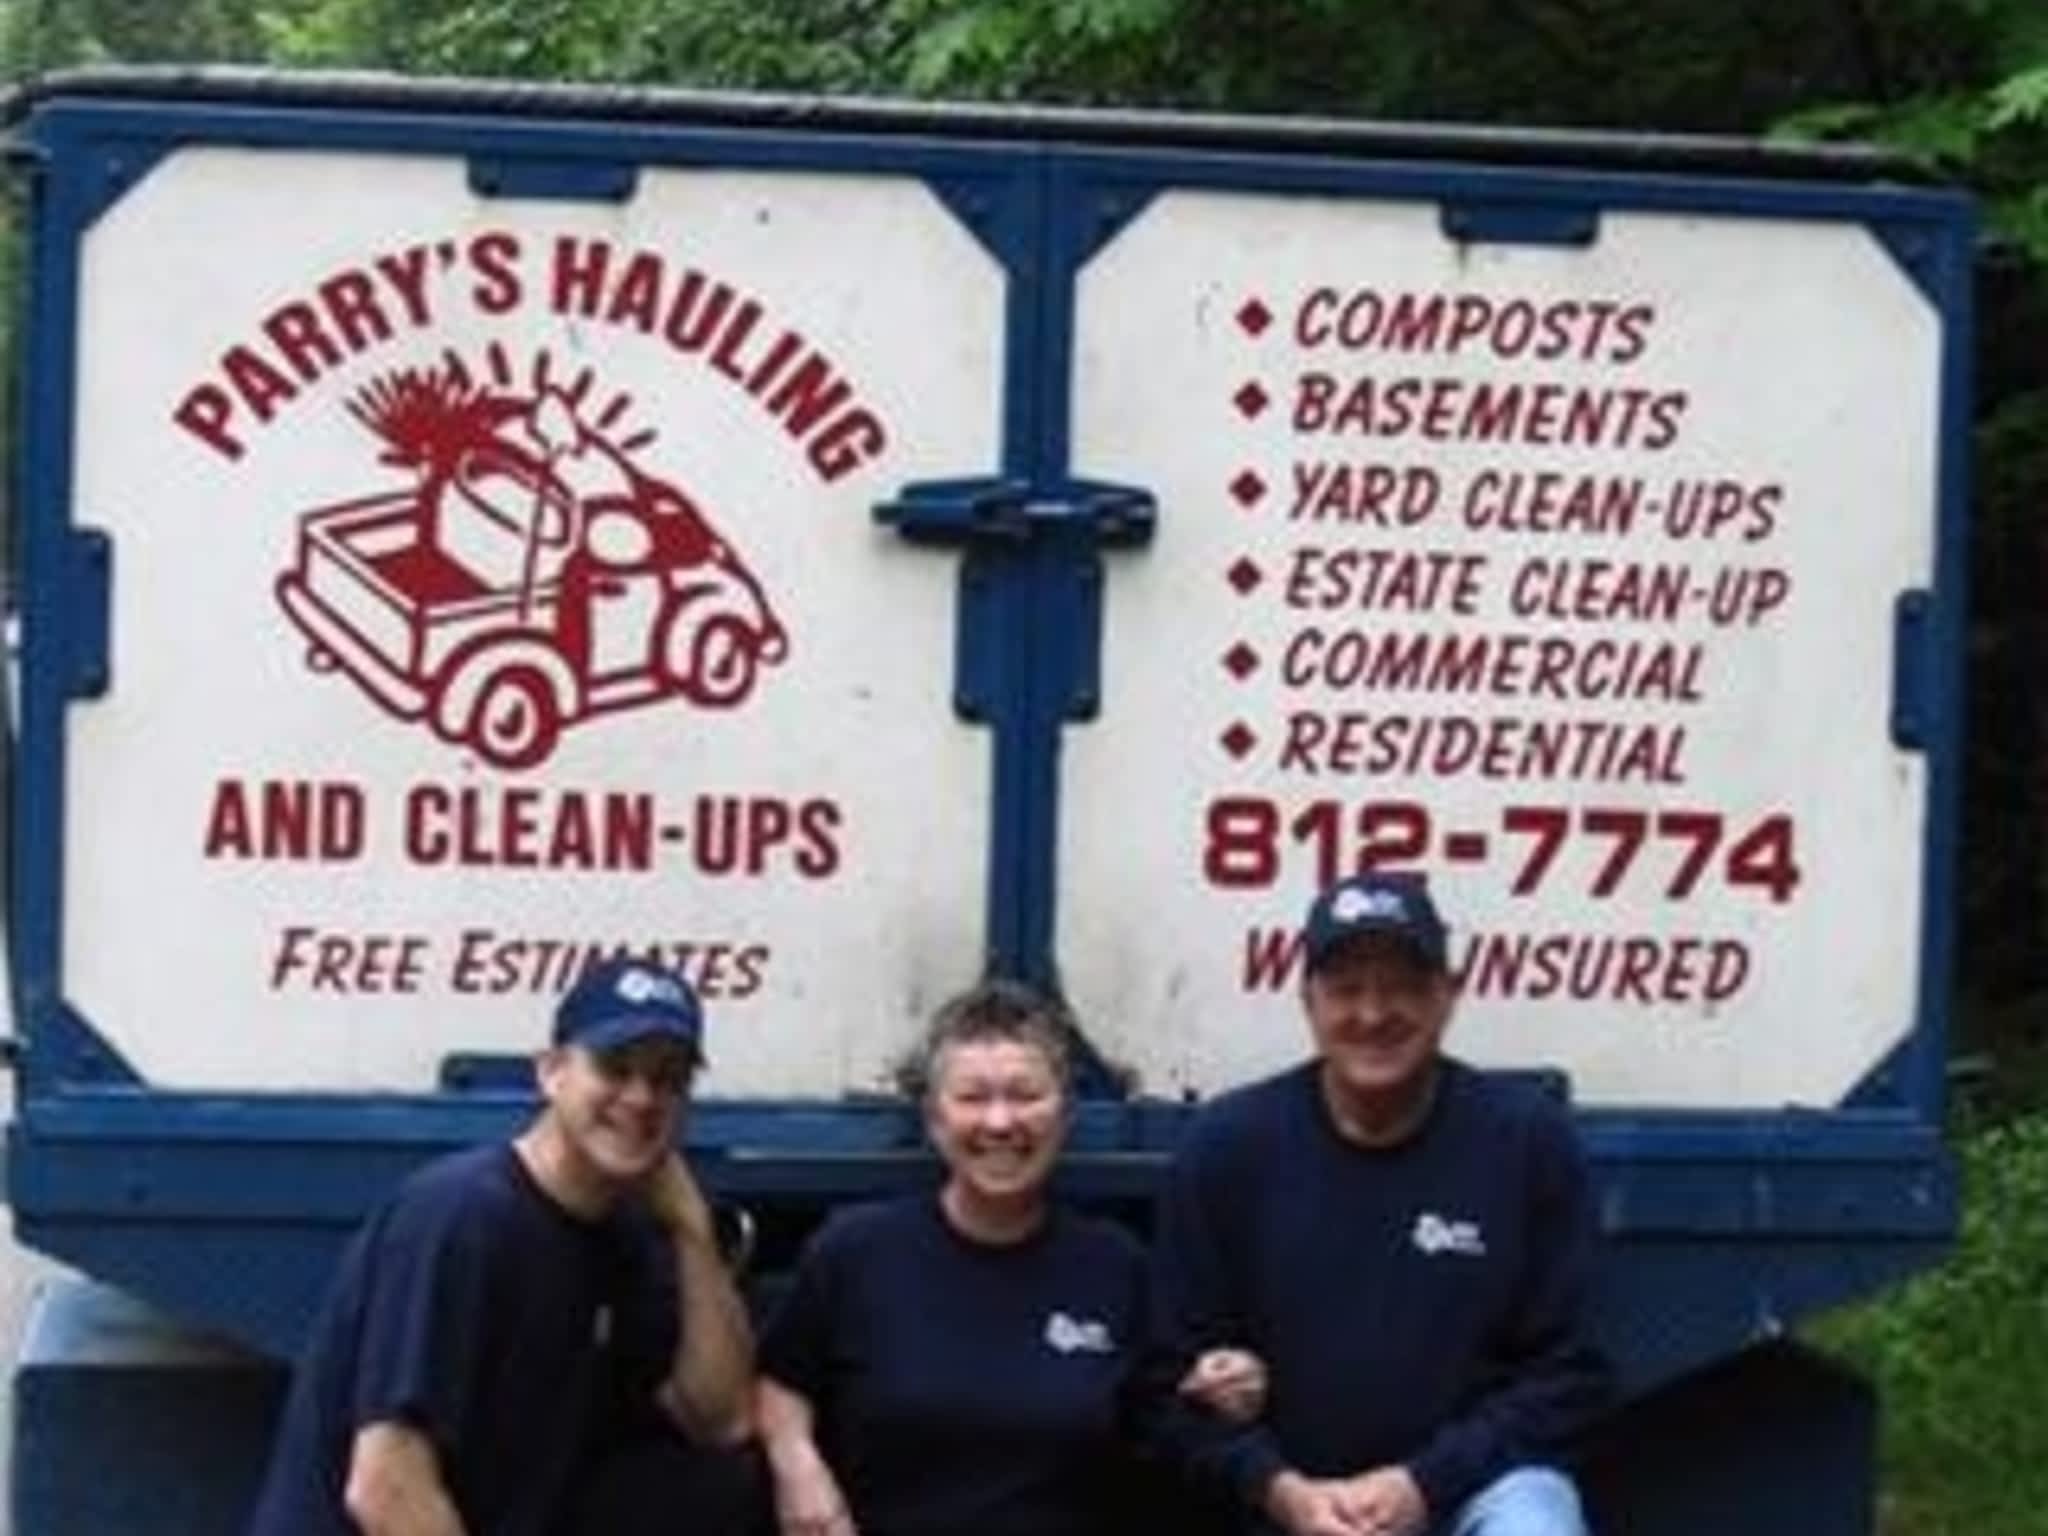 photo Parry's Hauling & Junk Removal